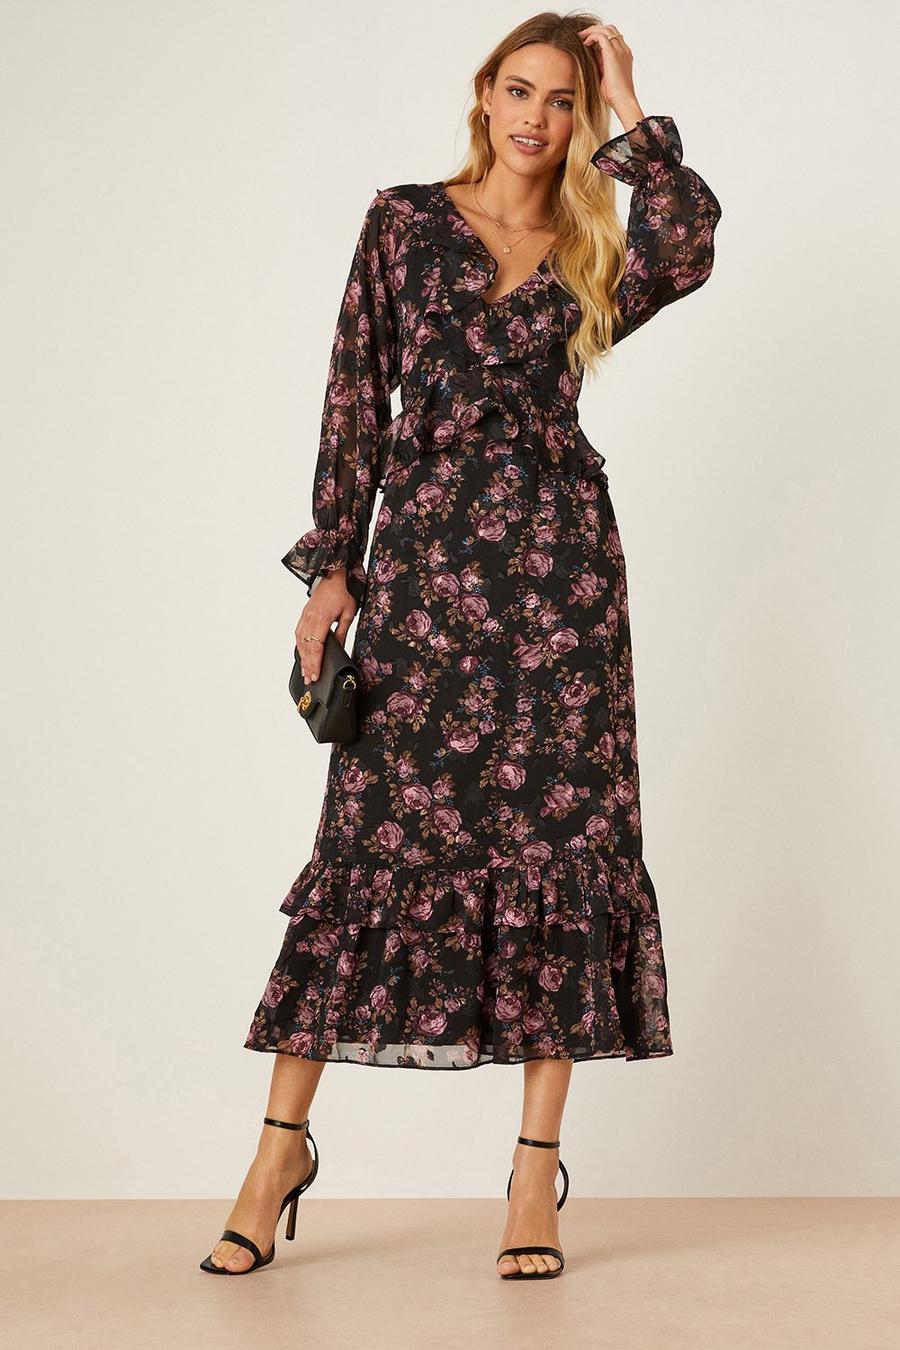 Floral Rose Print Tie Back Ruffle Midaxi Dress